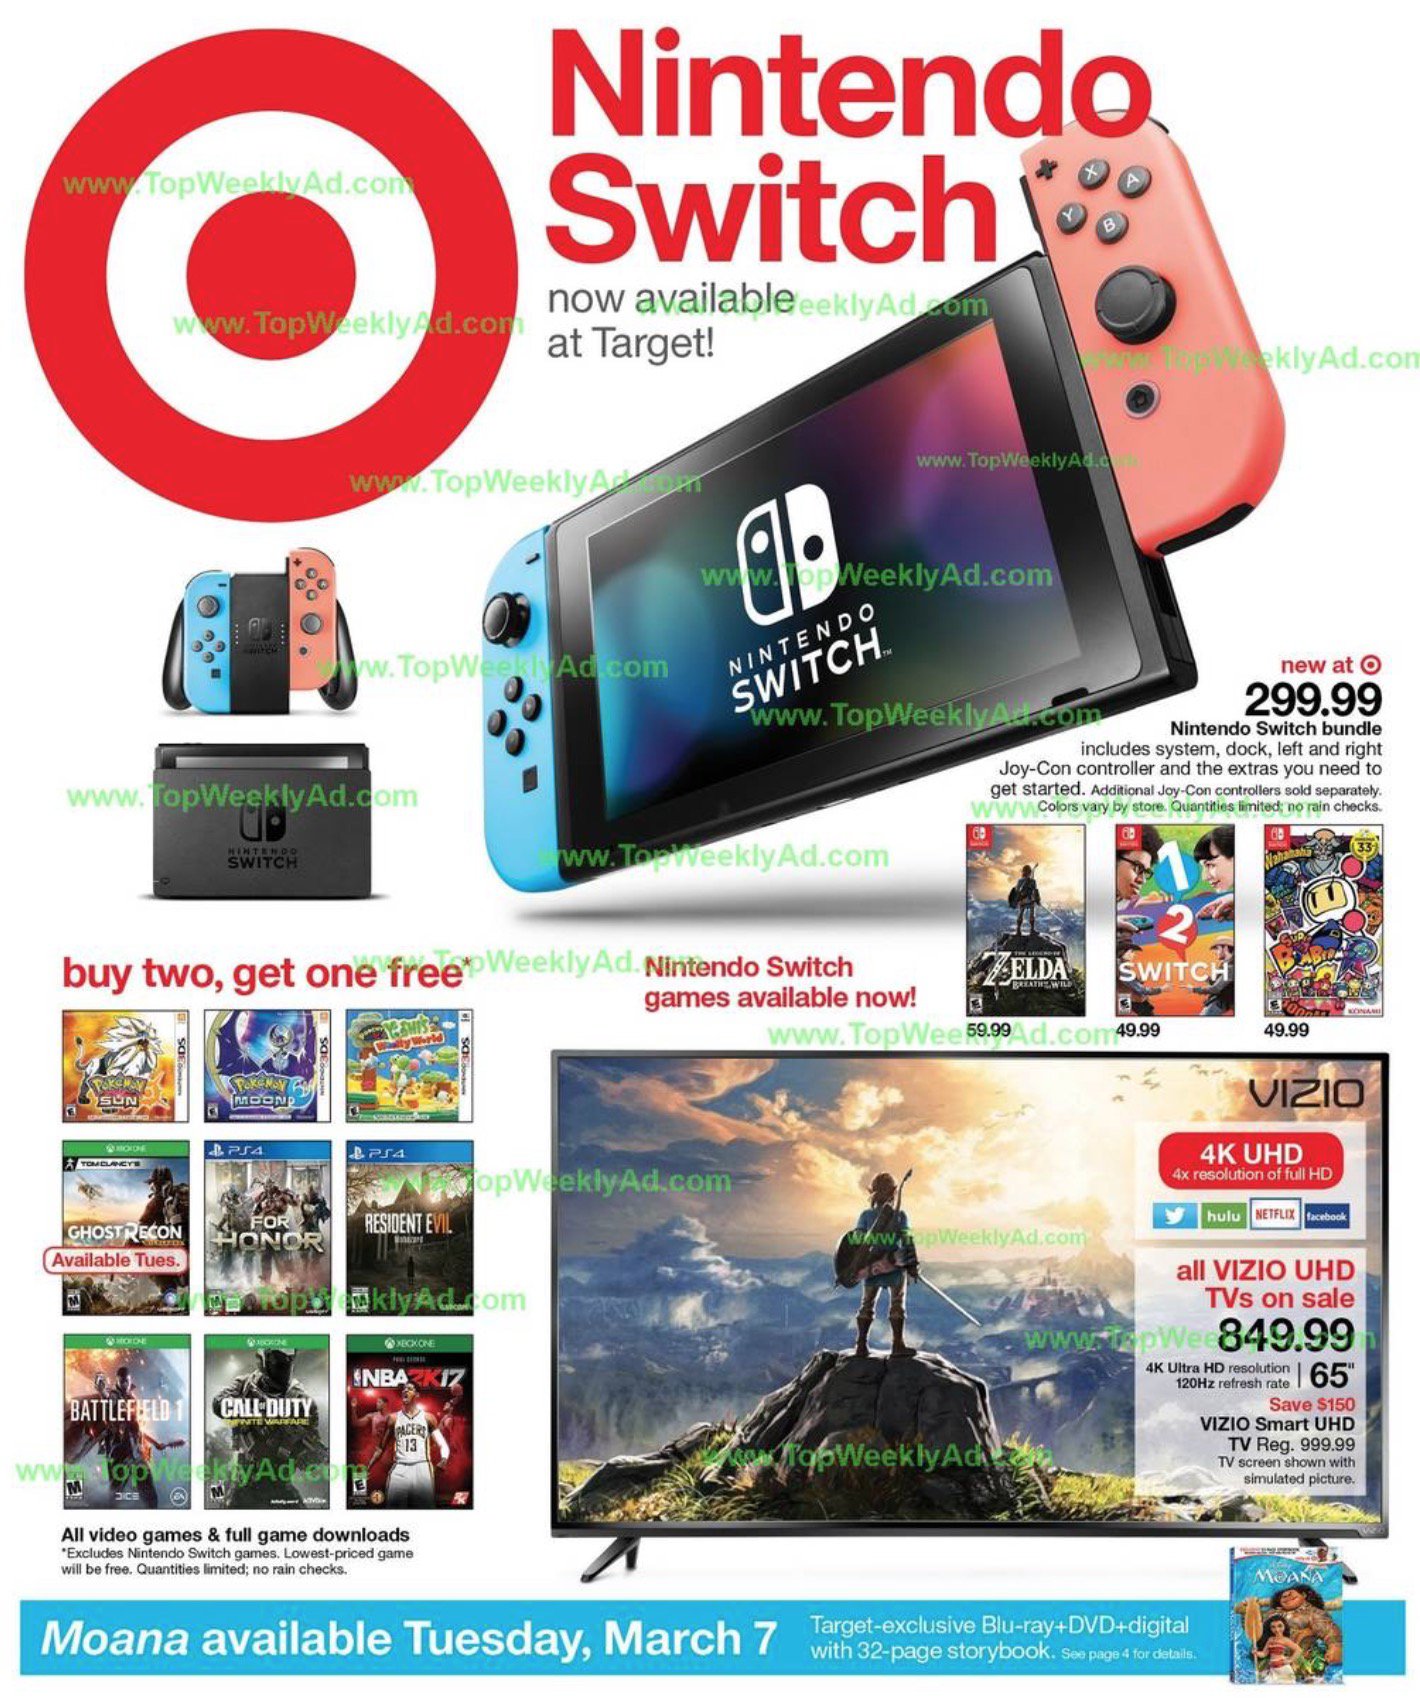 buy 2 switch games get 1 free